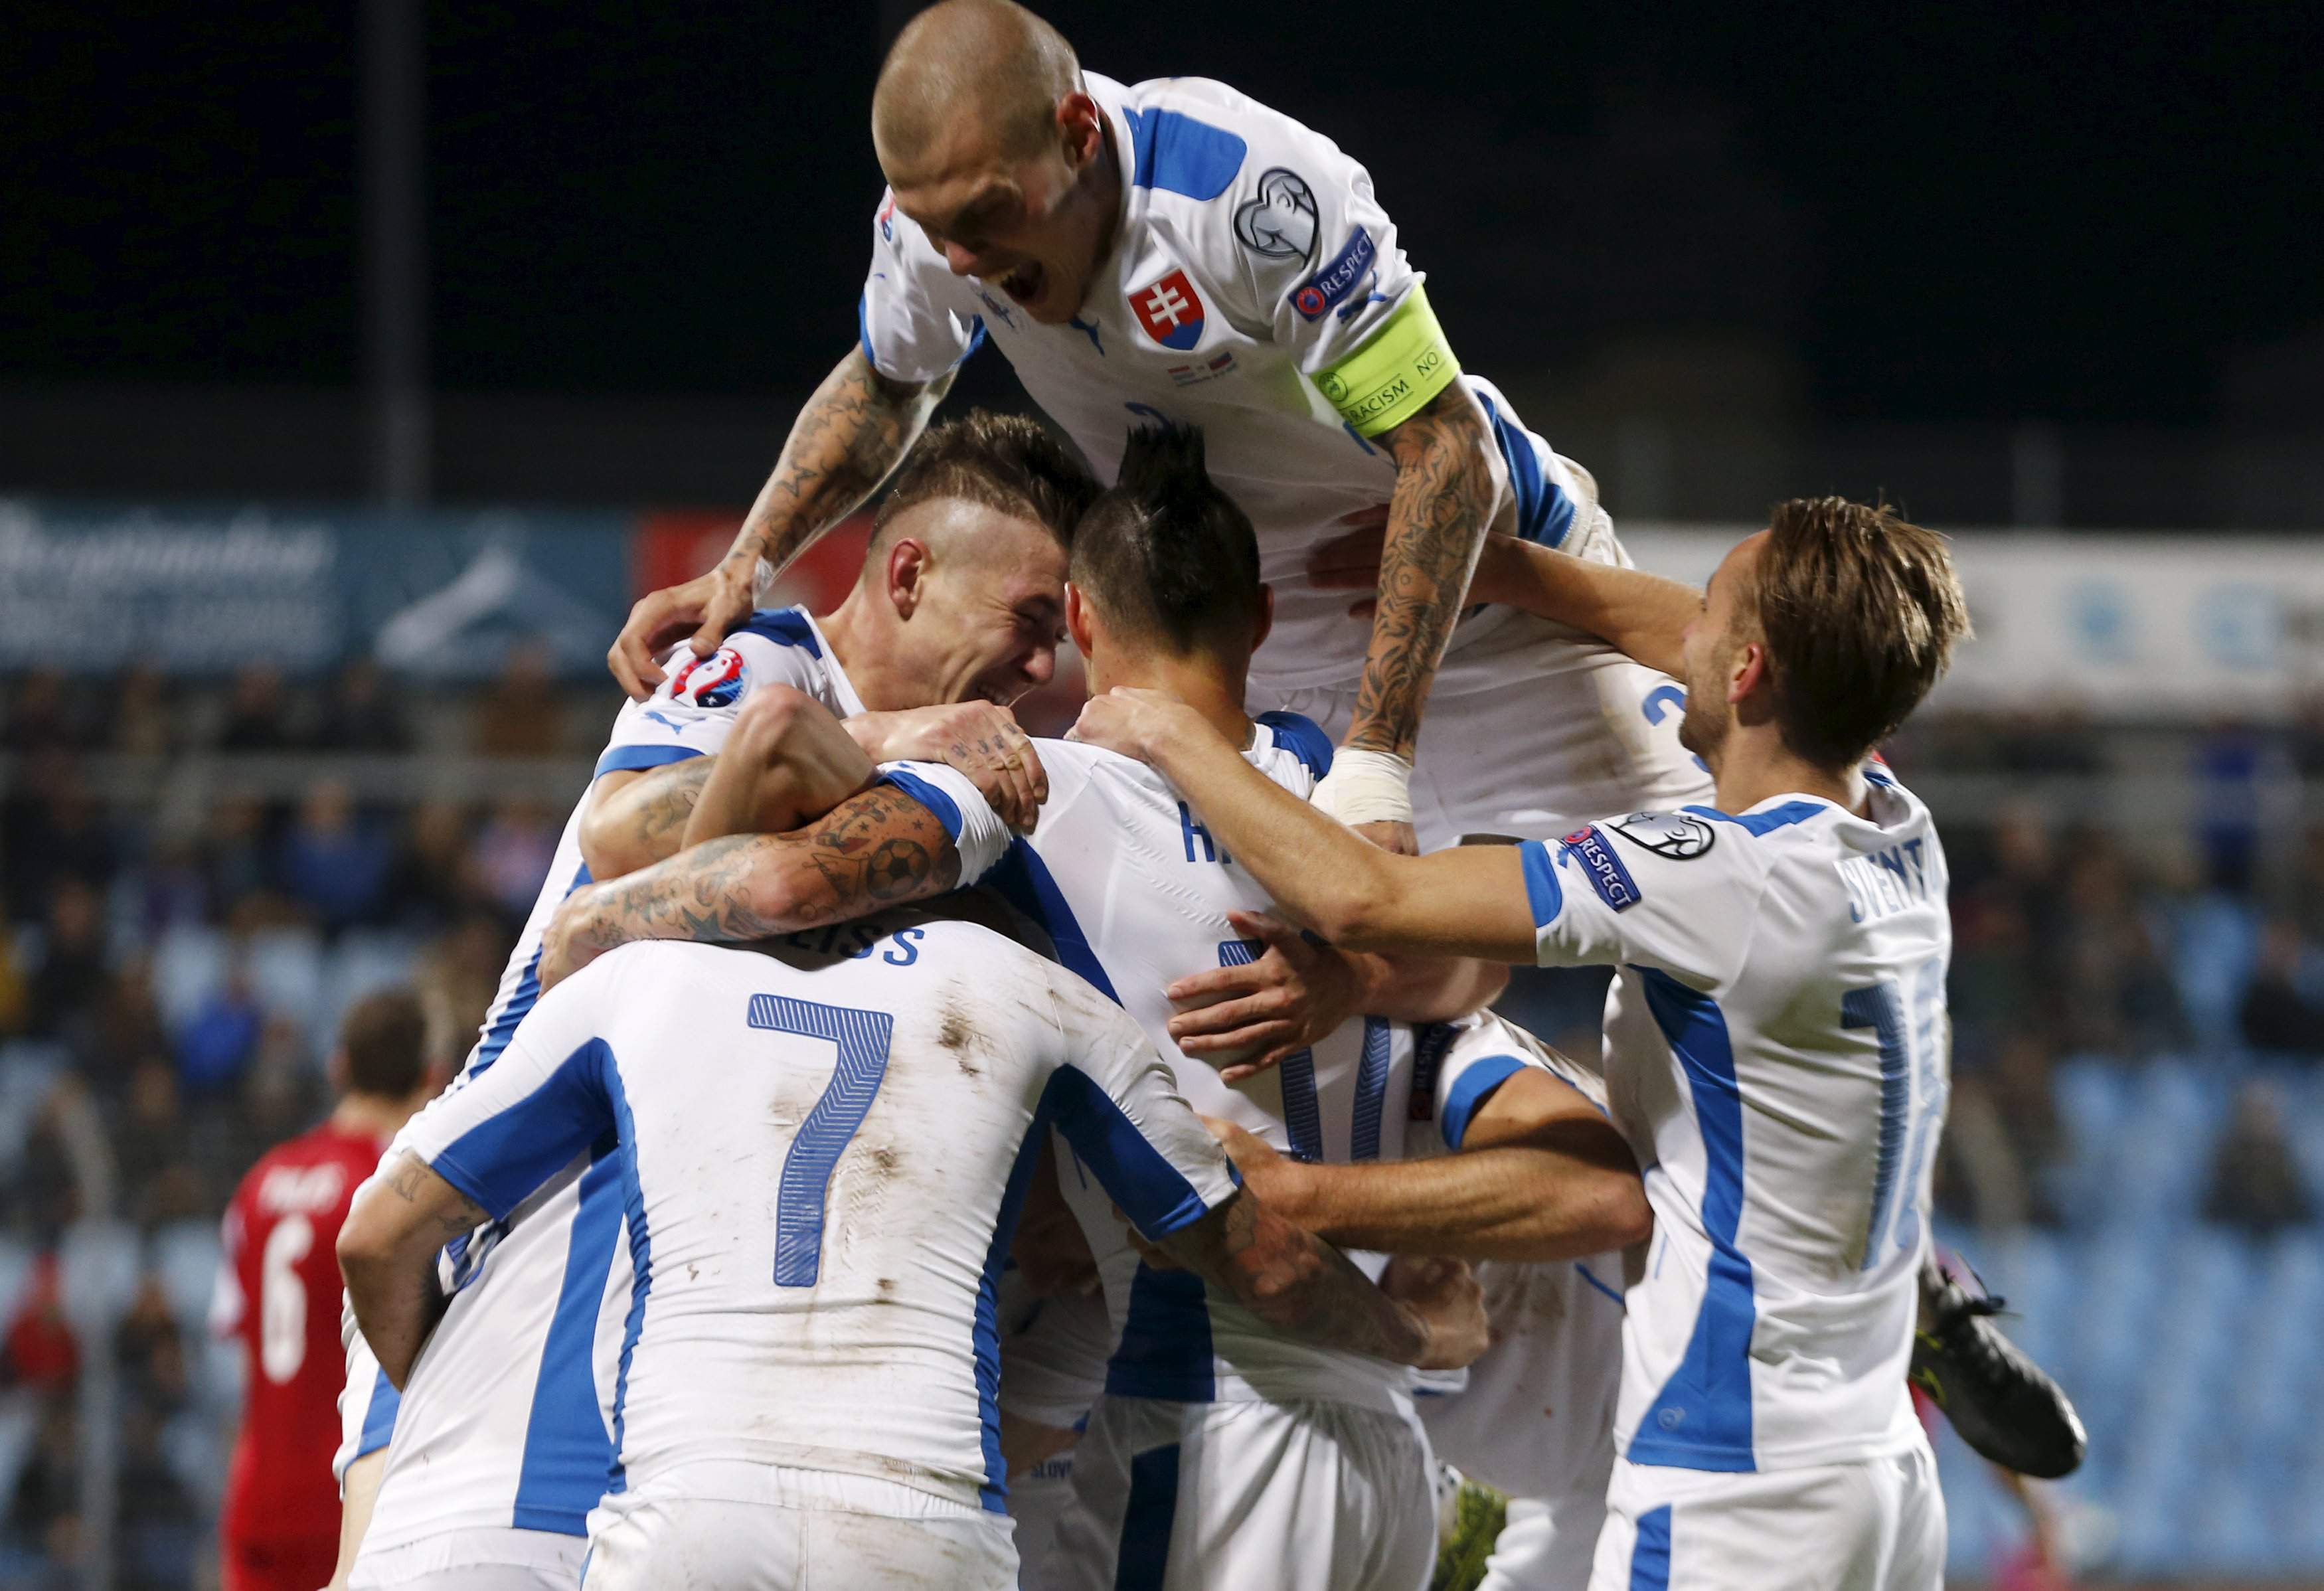 Slovakia's players celebrate after Robert Mak (unseen) scored against Luxembourg during their Euro 2016 group C qualification match at the Josy Barthel stadium in Luxembourg, October 12, 2015.  REUTERS/Francois Lenoir